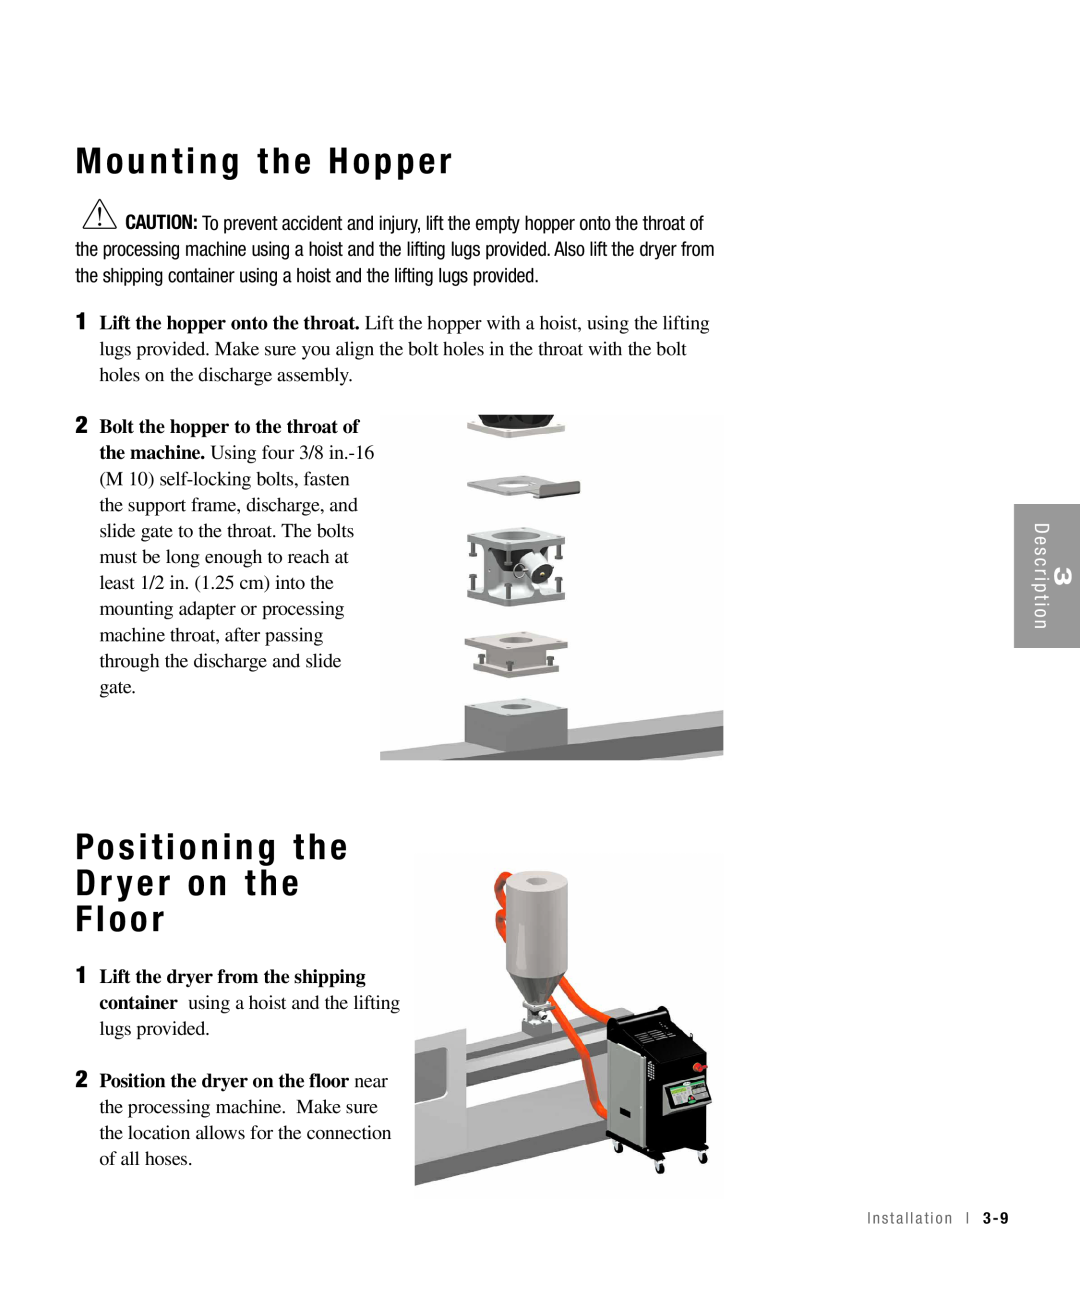 Conair 100, 25, 15, 50 specifications Mounting the Hopper, Positioning the Dr yer on the Floor, D e s c r i p t i o n 